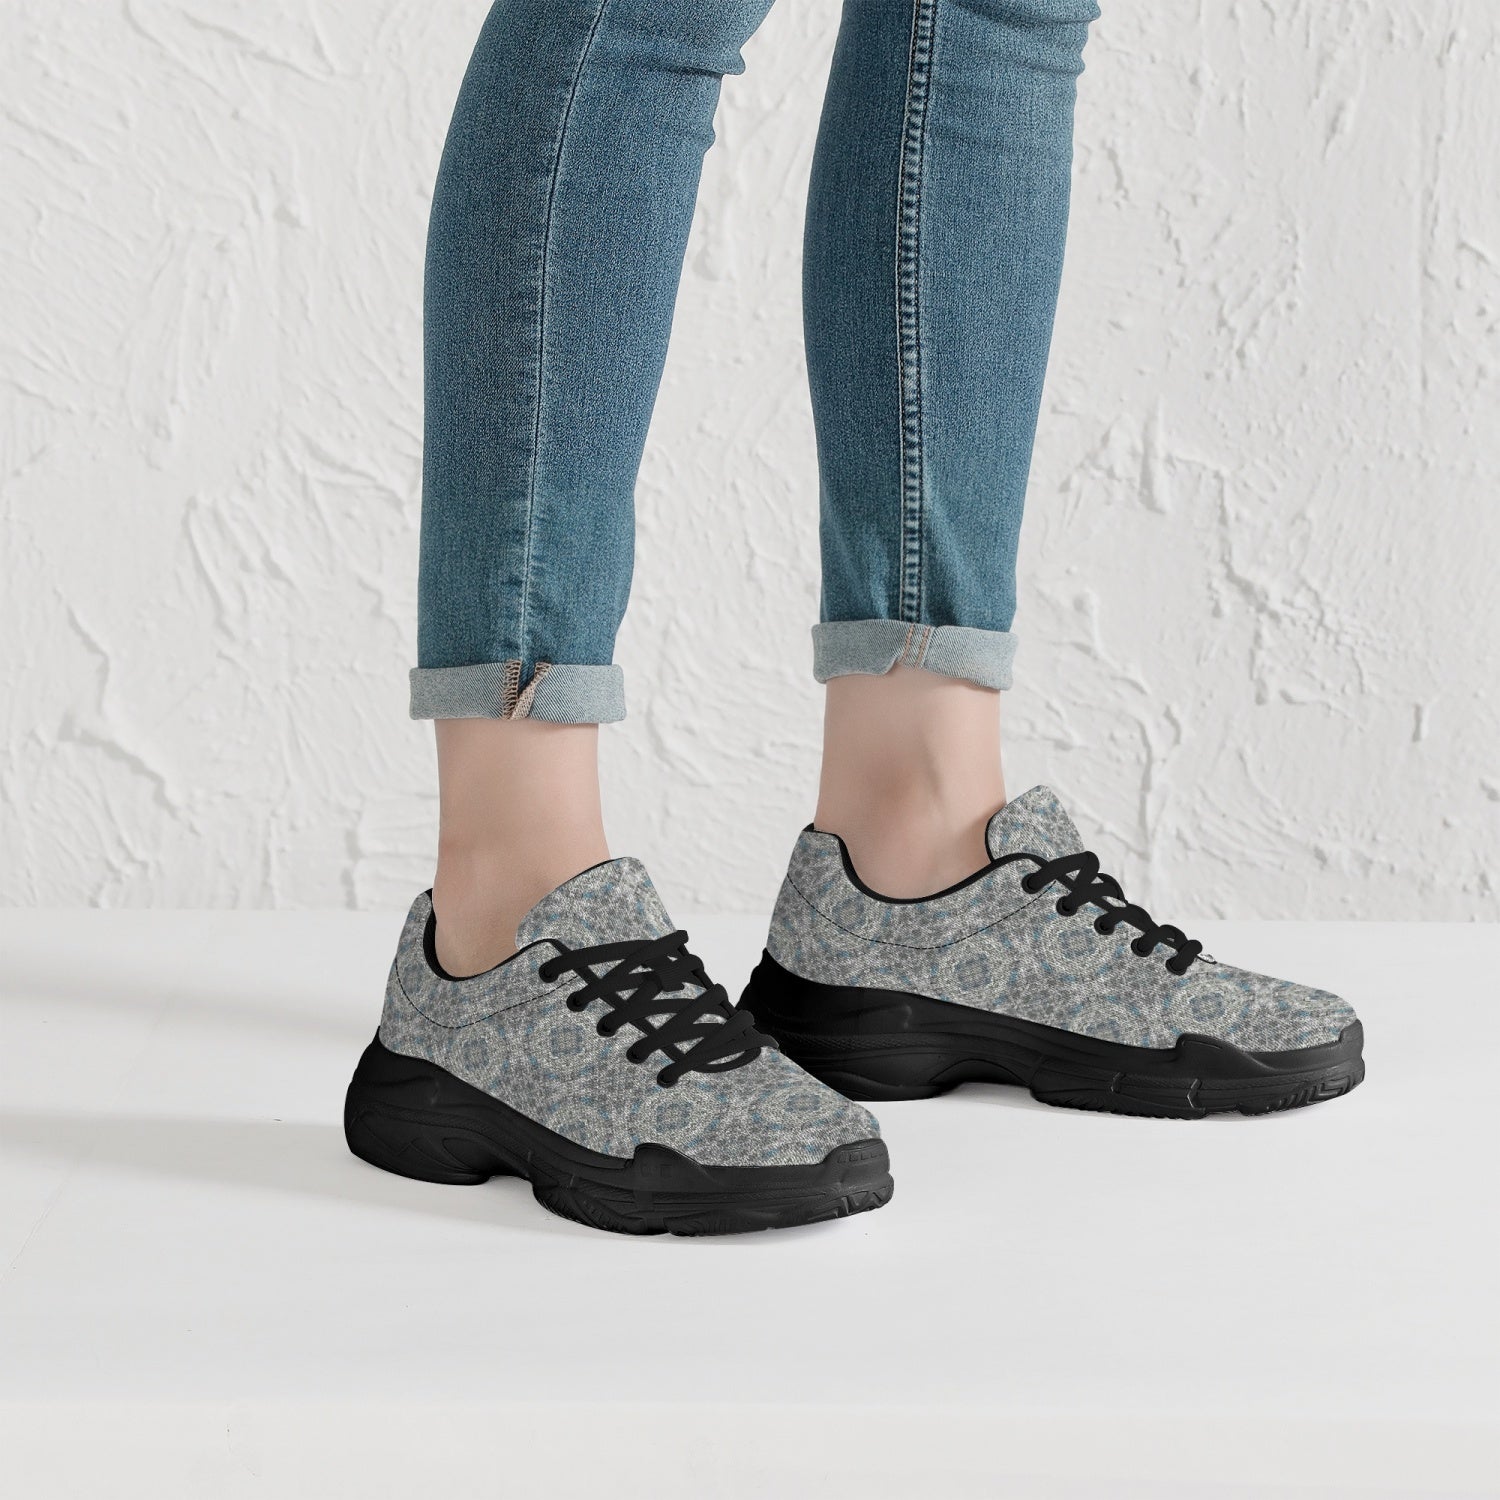 Snow Cristals, Geomatric patterned Trendy Chunky Sneakers - White/Black, by Sensus Studio Design